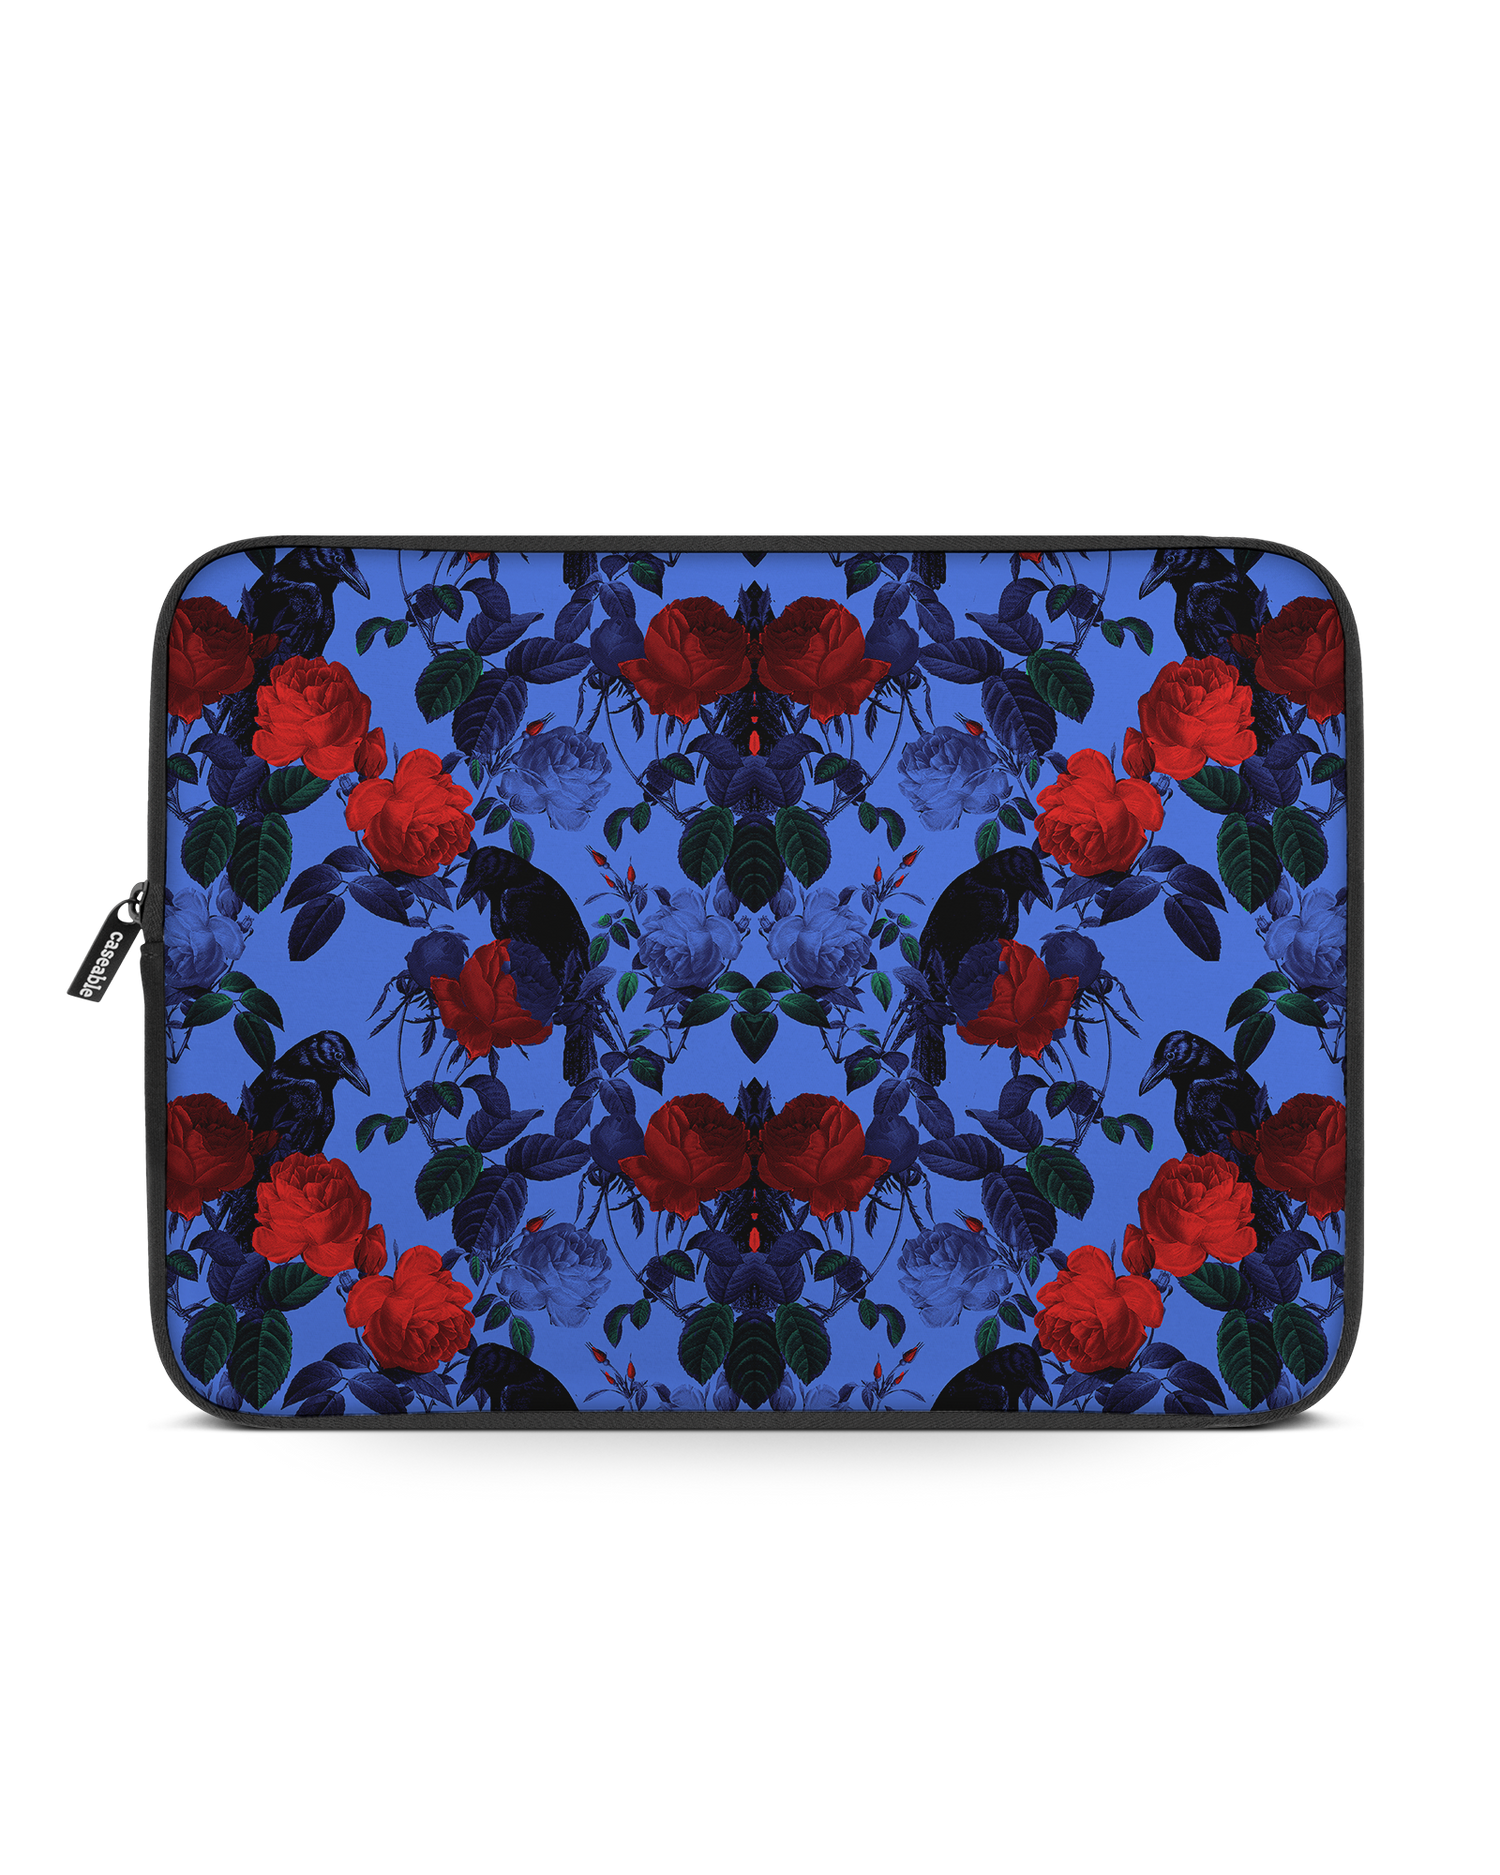 Roses And Ravens Laptop Case 15 inch: Front View